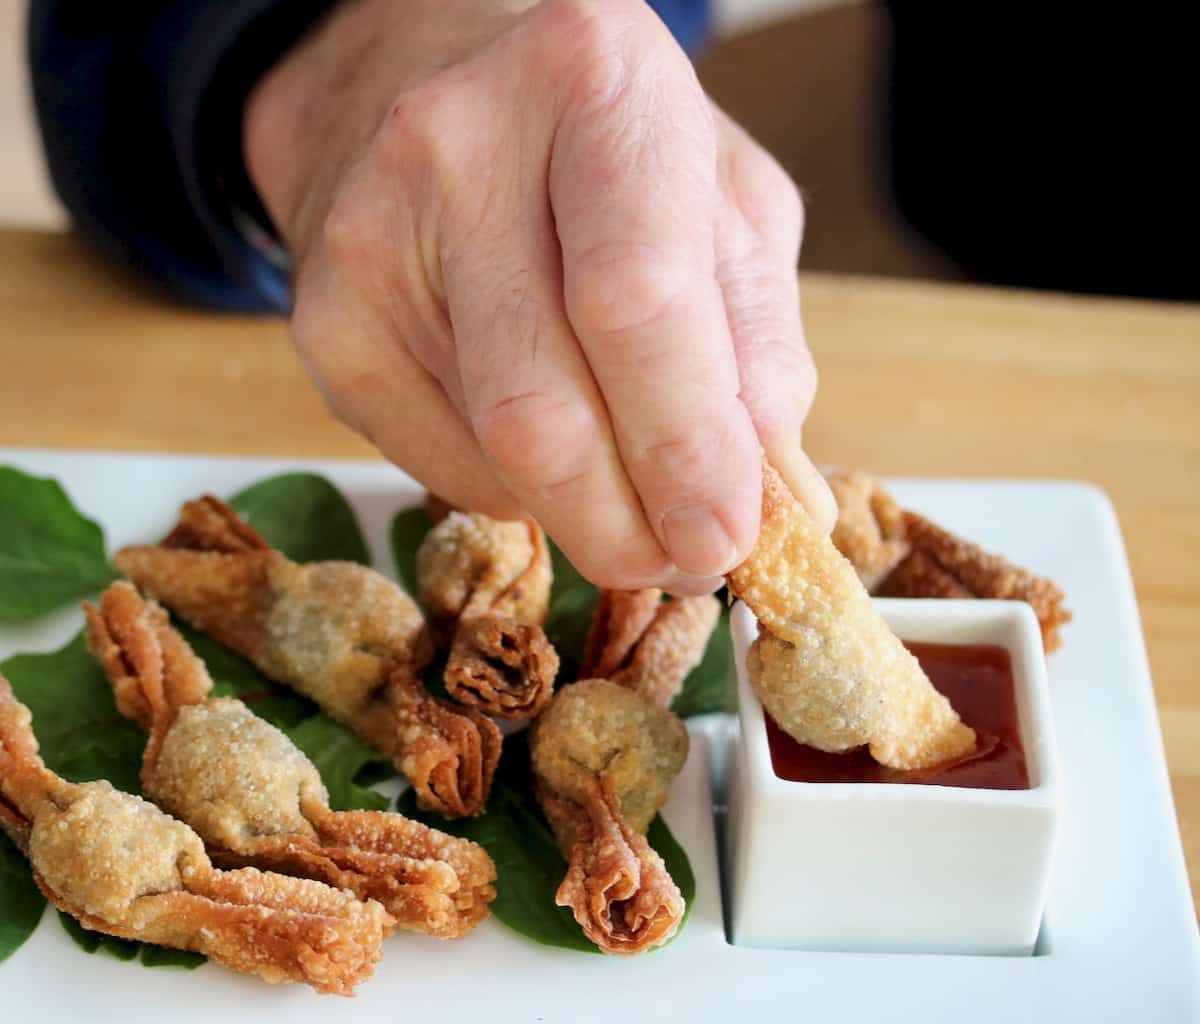 hand holding wonton and dipping in sauce